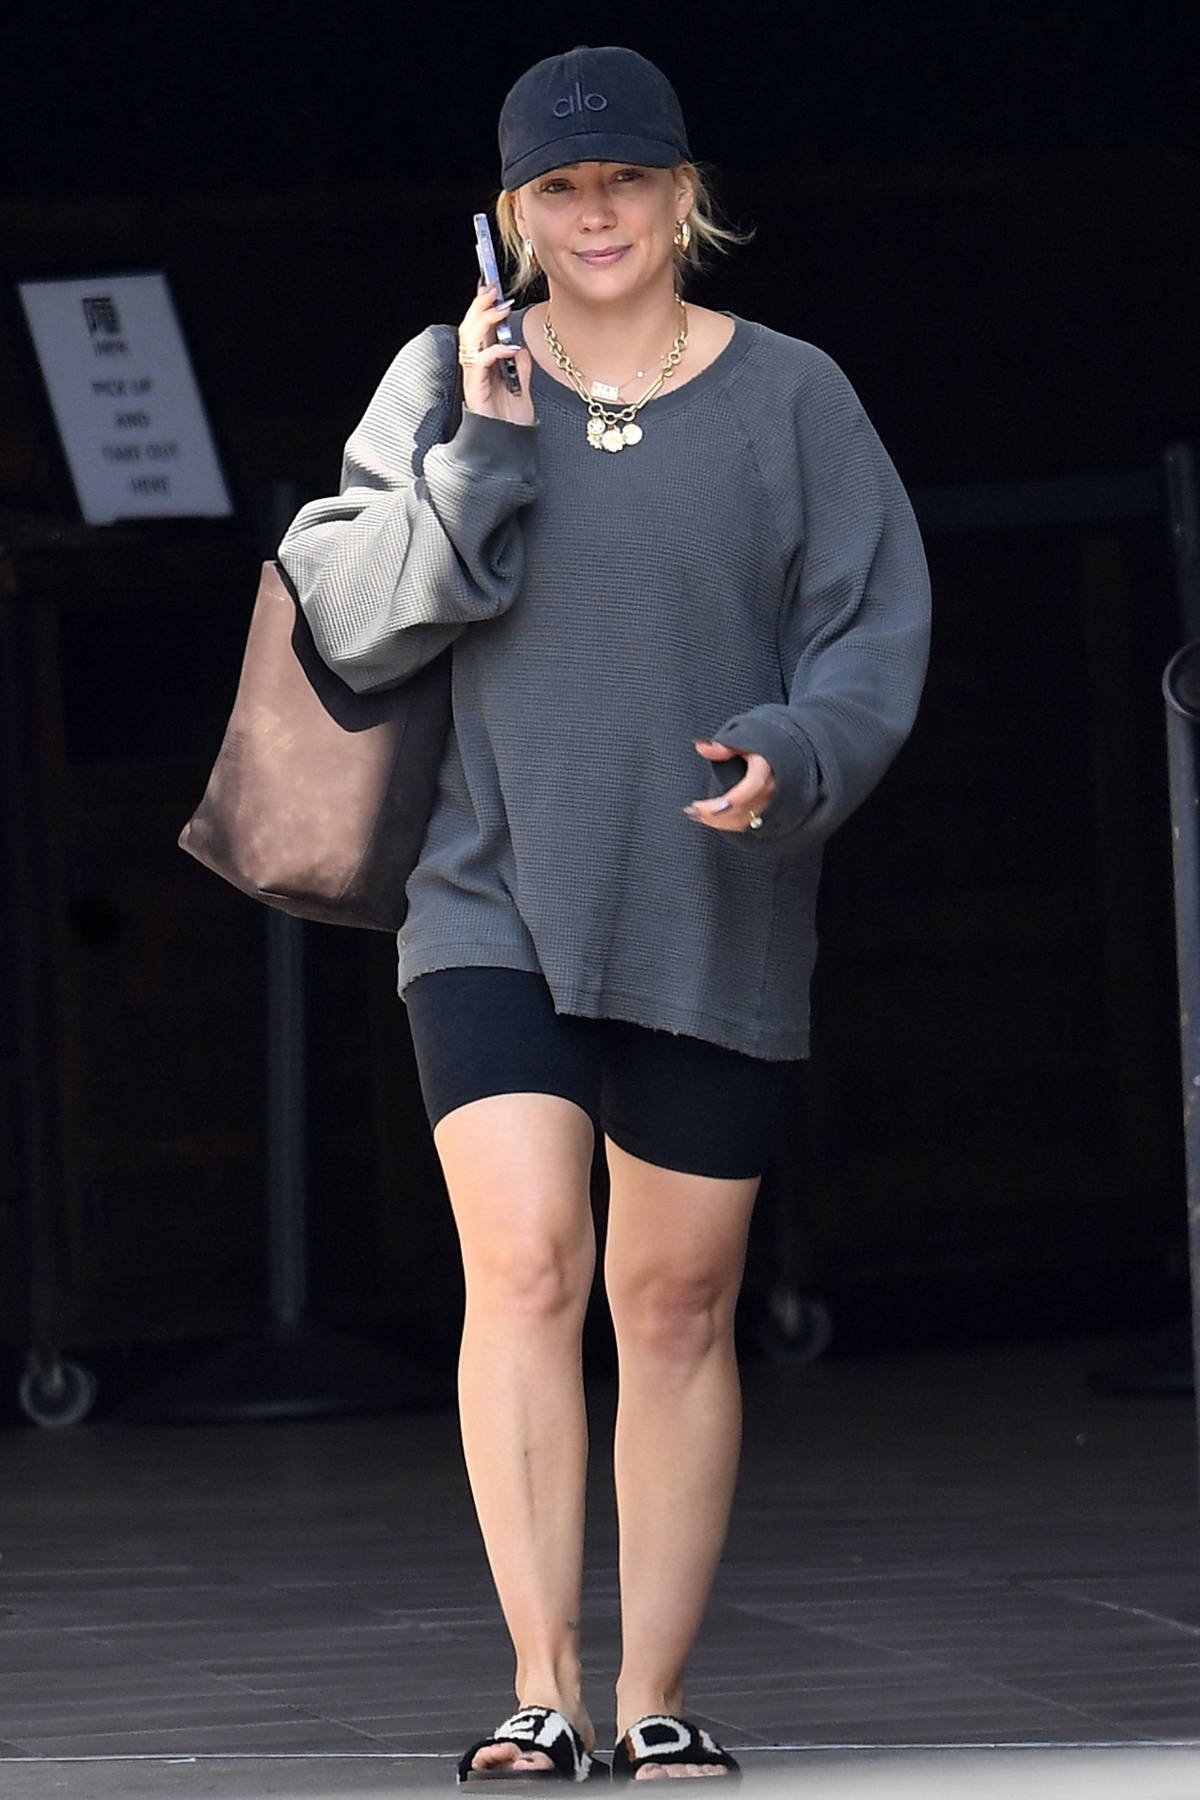 Kylie Jenner keeps it cozy in an oversized sweater and leggings while out  running errands in